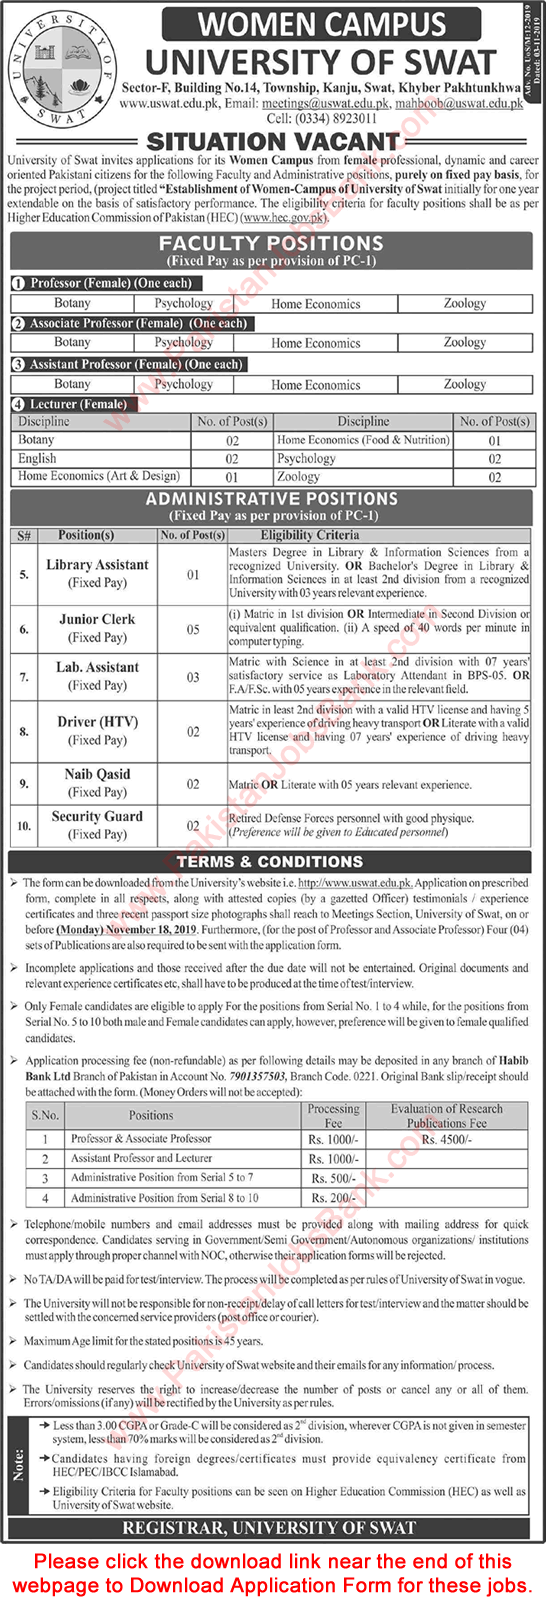 University of Swat Jobs 2019 November Application Form Teaching Faculty & Others Latest